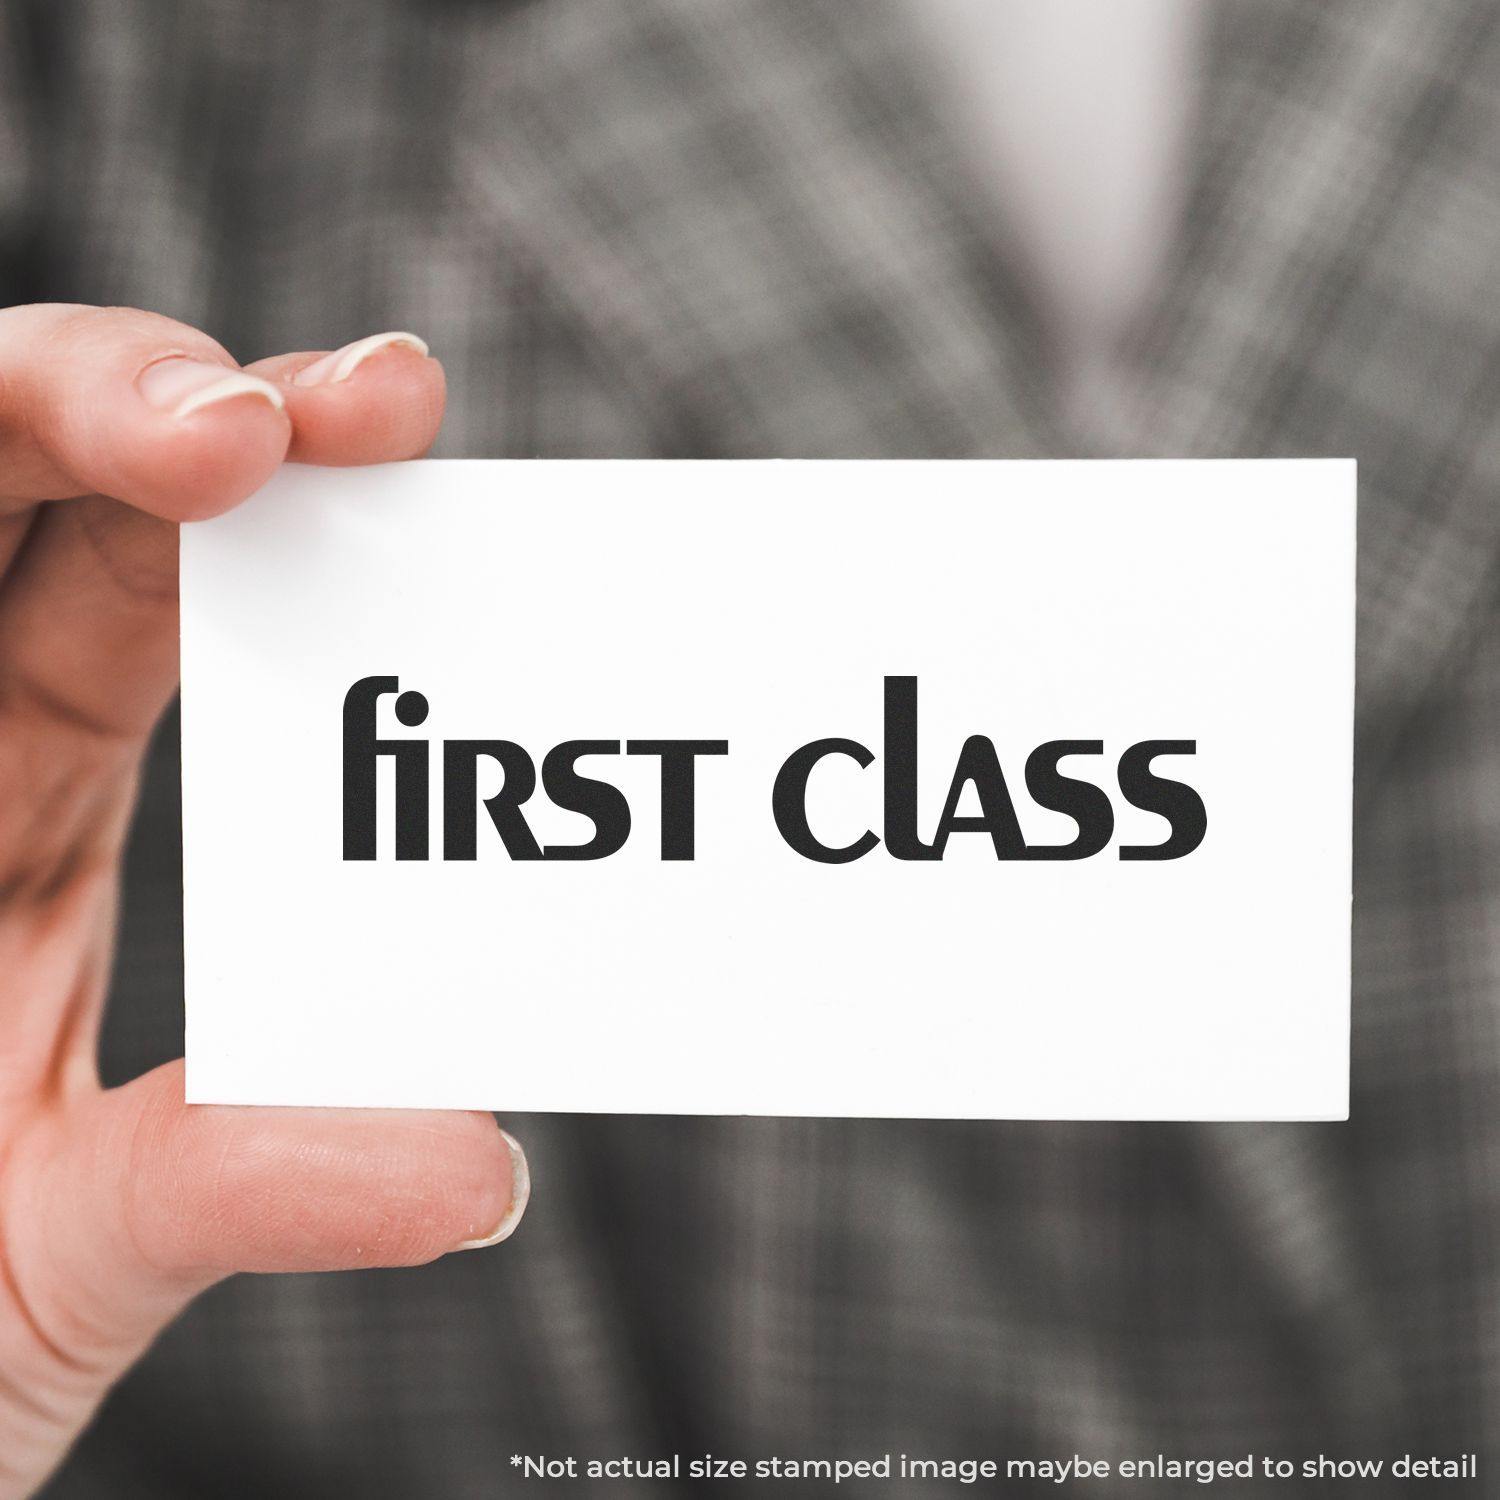 A stock office rubber stamp with a stamped image showing how the text "first class" in a lowercase font is displayed after stamping.